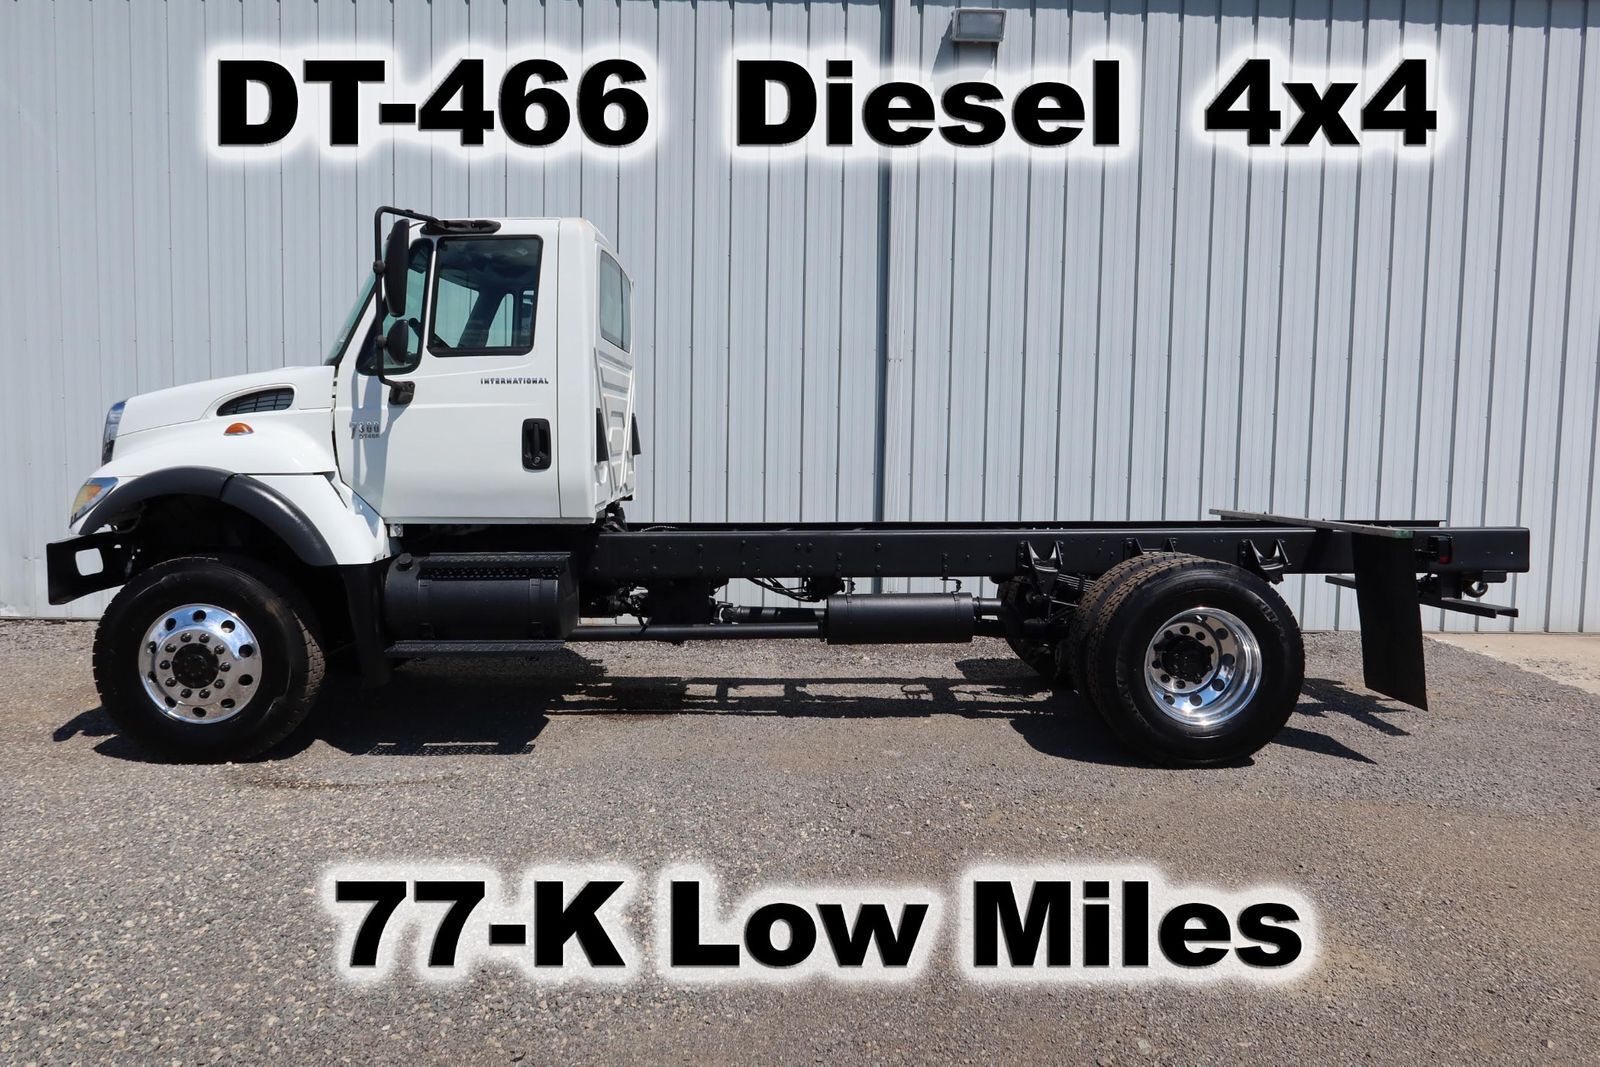 7400 Dt-466 Diesel 4x4 4 Wheel Drive Cab Chassis Straight Frame Truck  77-k Mile